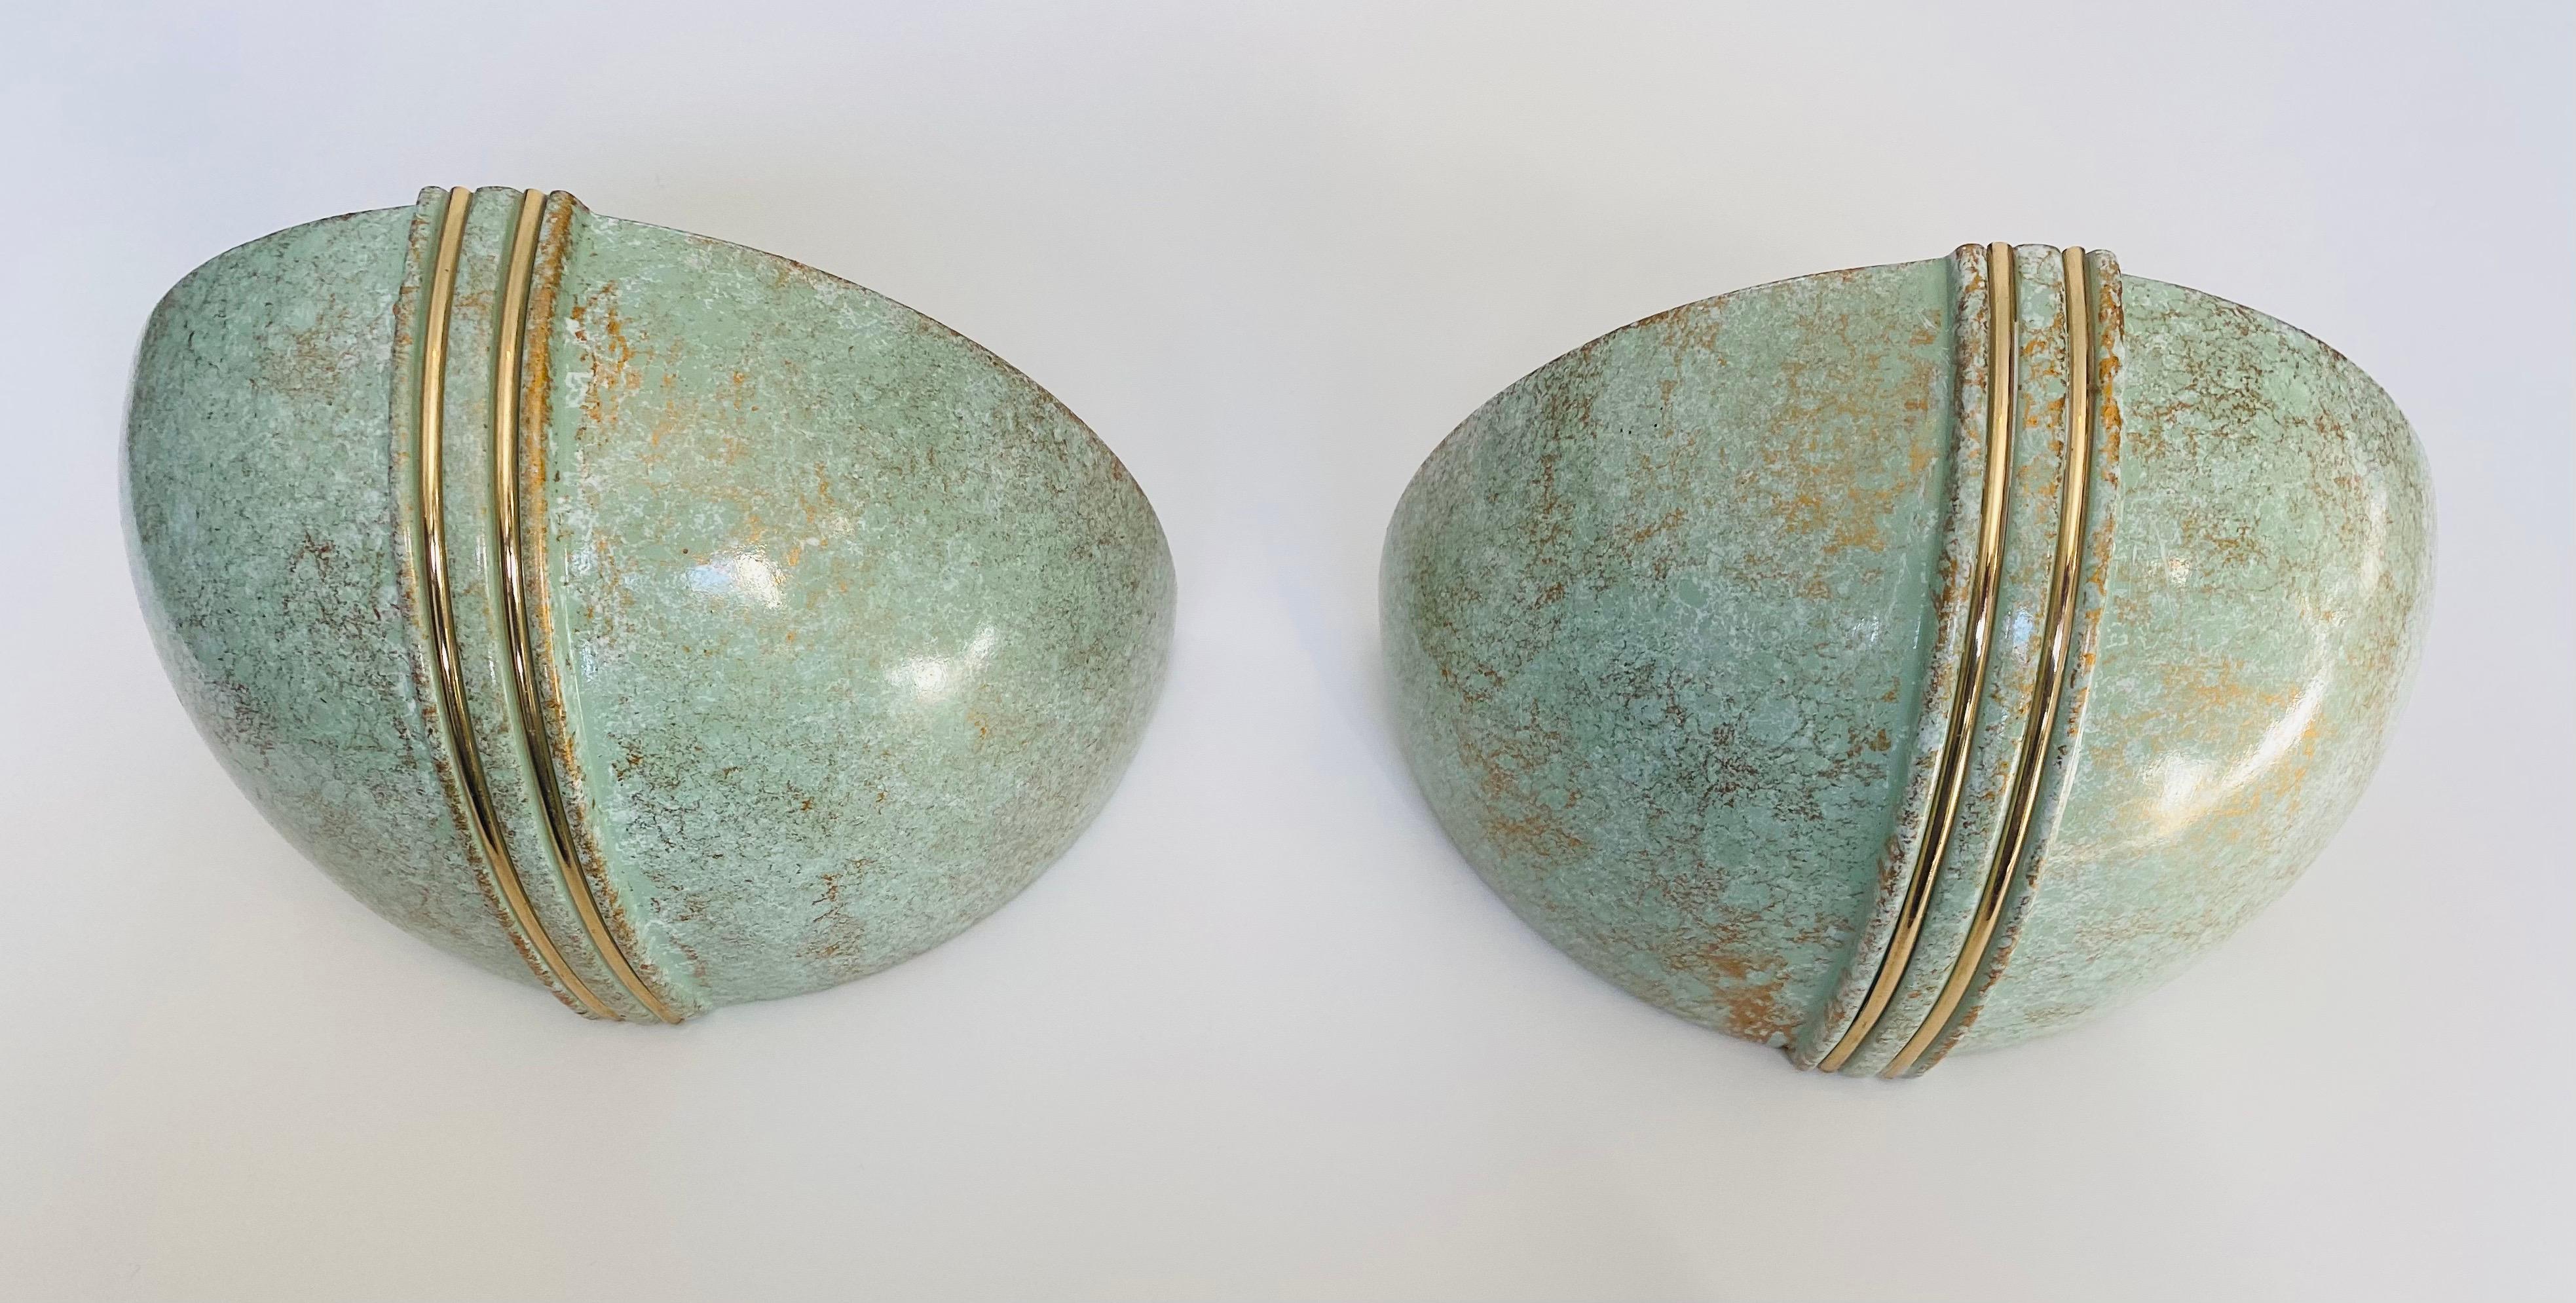 Pair of French 1980s Ceramic Verdigris Demilune Wall Lights Uplight Sconces For Sale 2